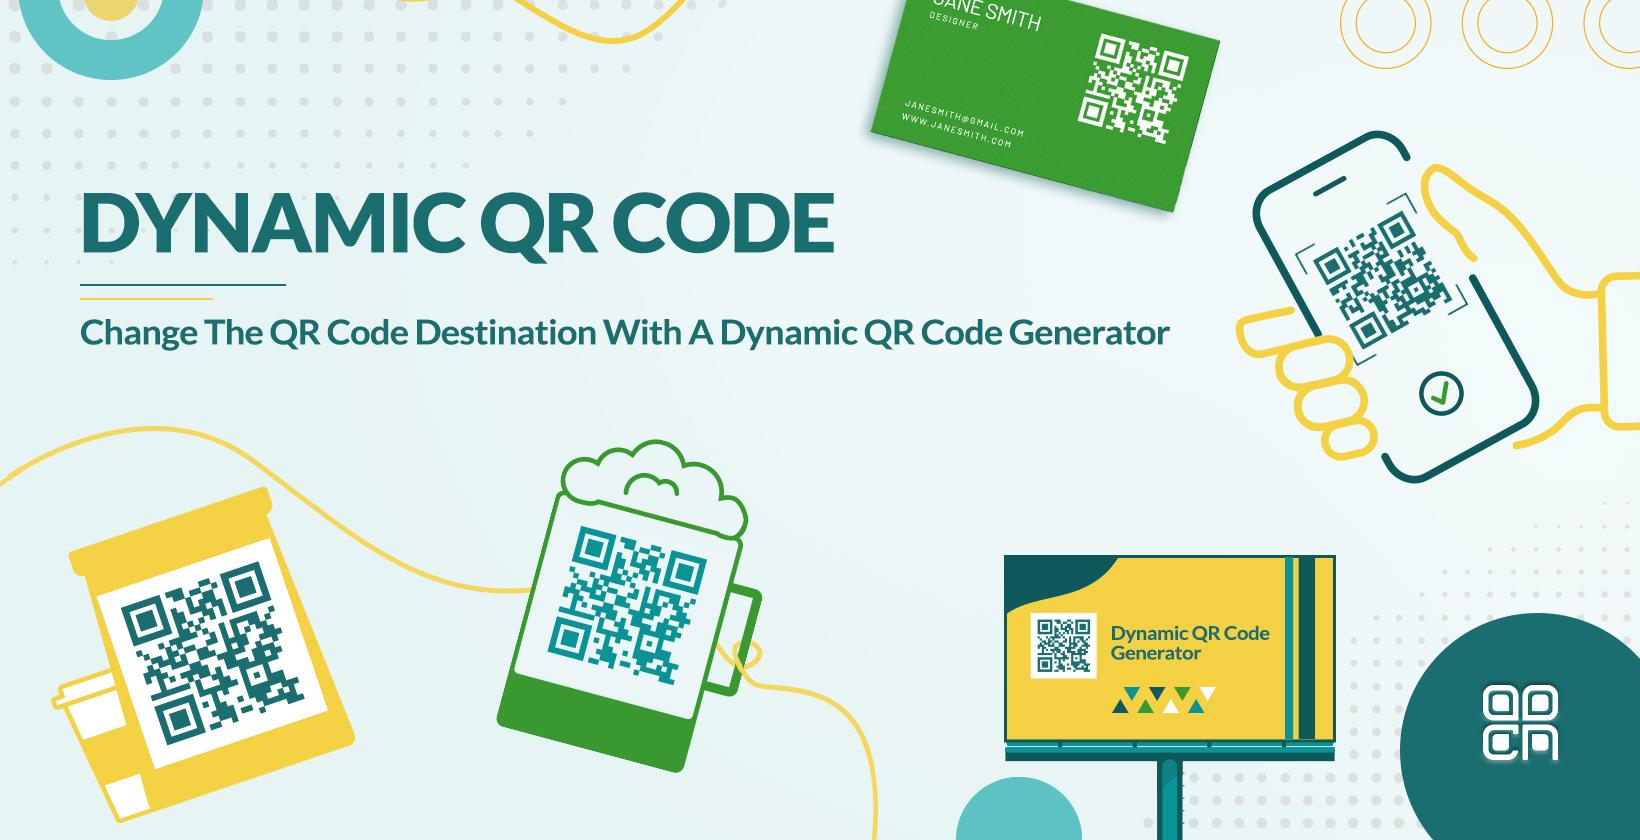 Dynamic QR Codes: Definition, How It Works, Uses, Risks and Benefits